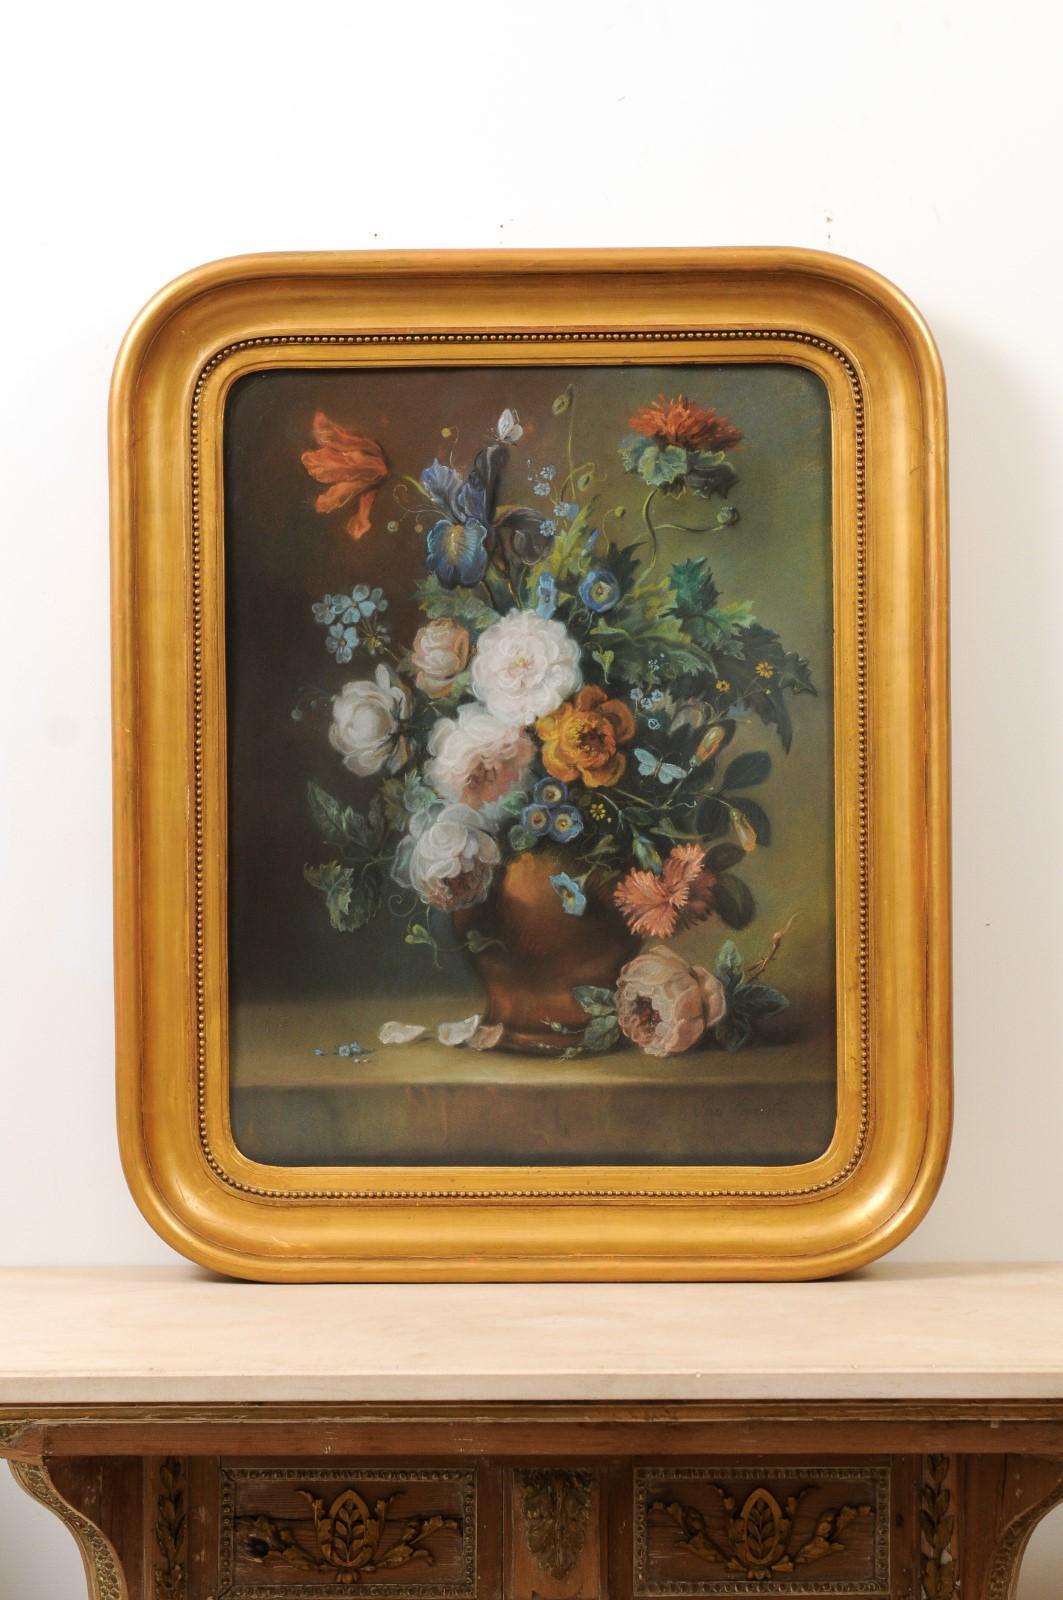 A French pastel floral painting from the 19th century depicting a bouquet of flowers in a vase, set in giltwood frame. Created in France during the 19th century, this painting demonstrates the mastery pastelists achieved over time, the most famous